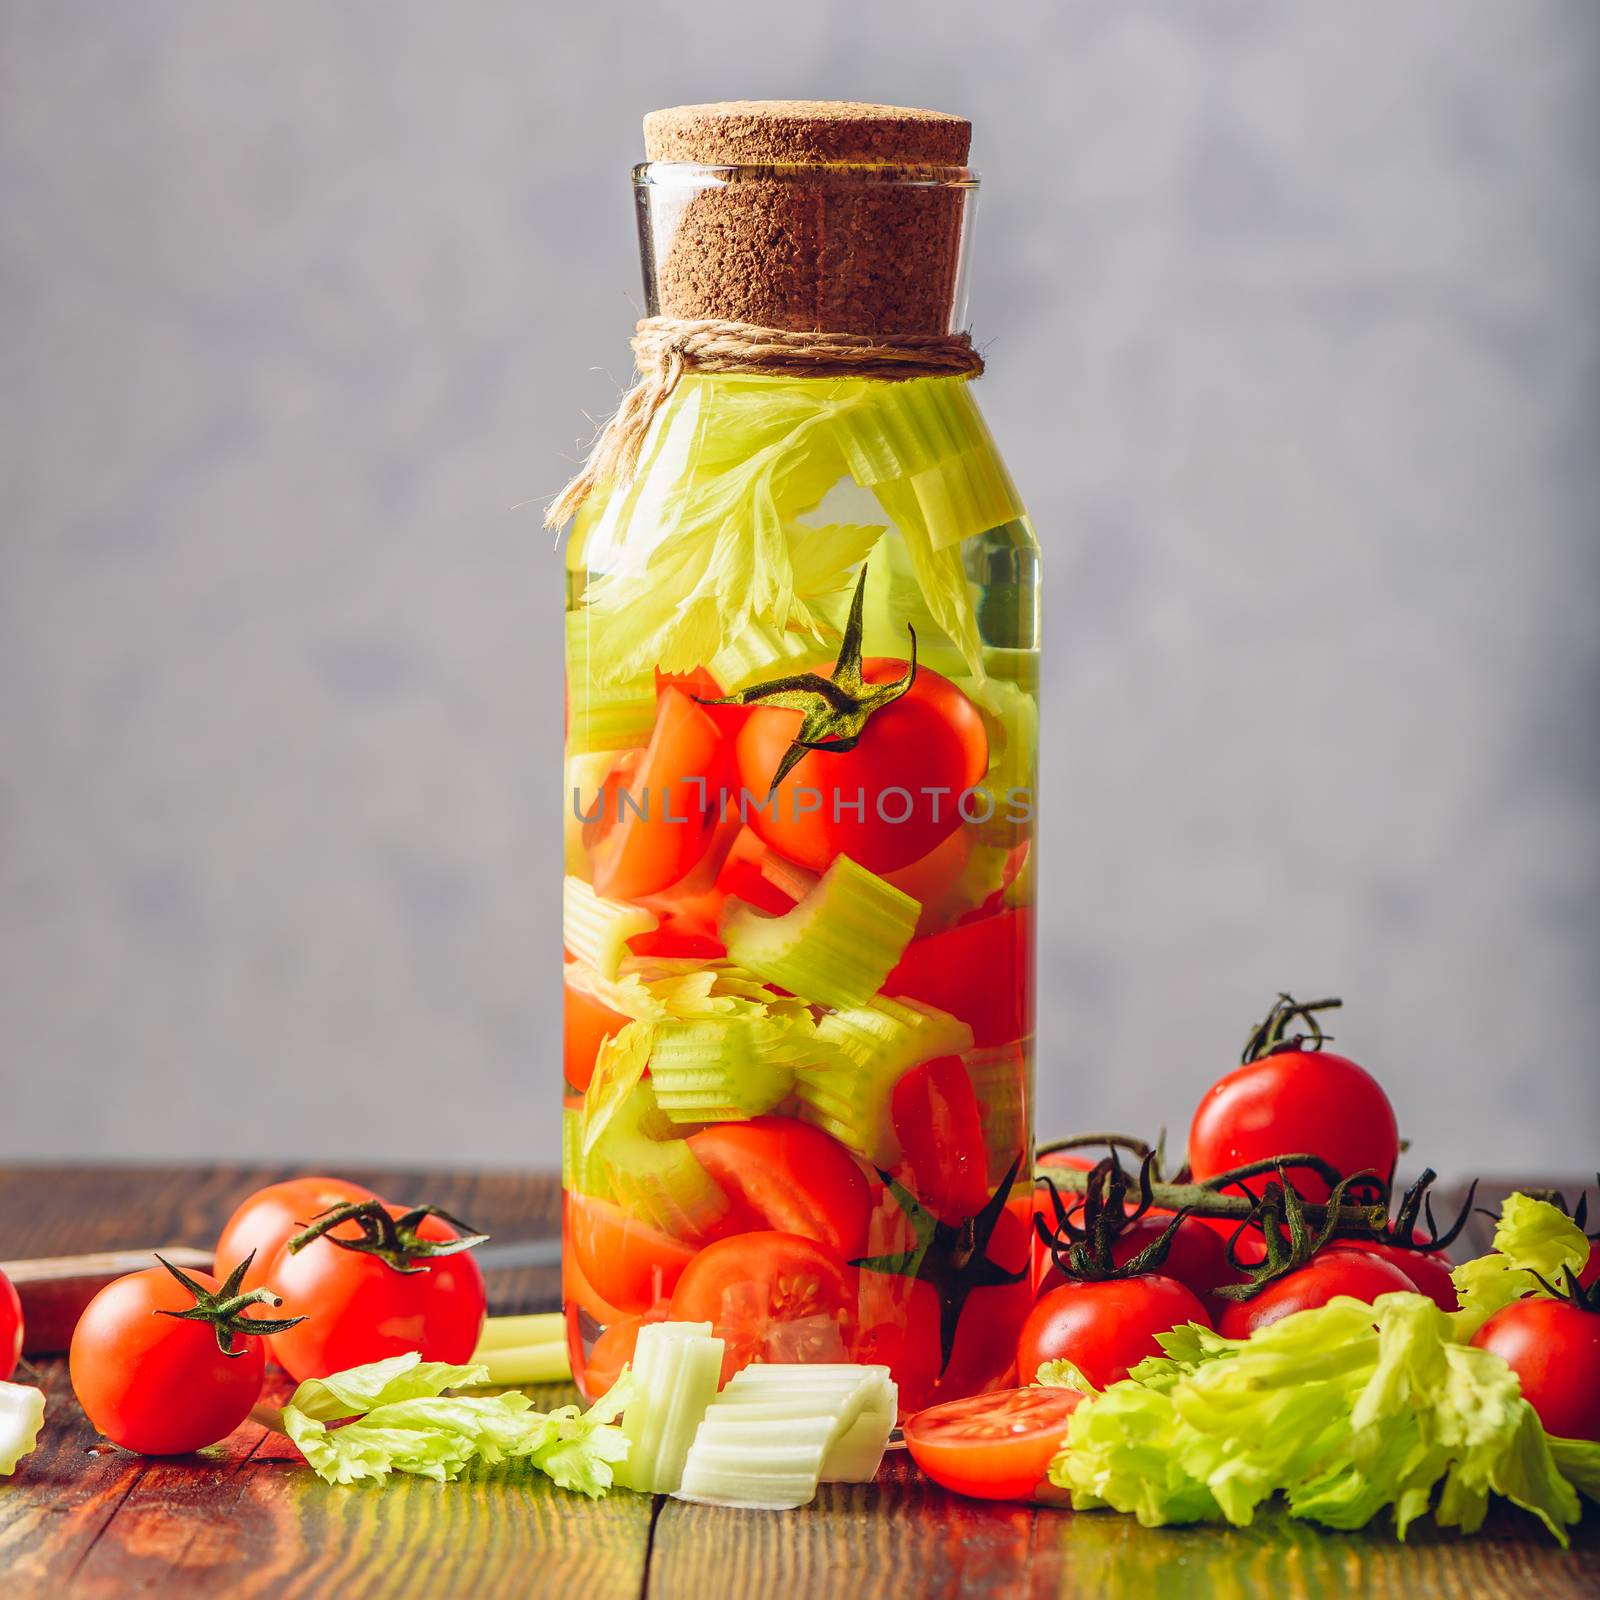 Cleansing Water Infused with Celery Stems and Cherry Tomatoes. Ingredients Scattered on Wooden Table.